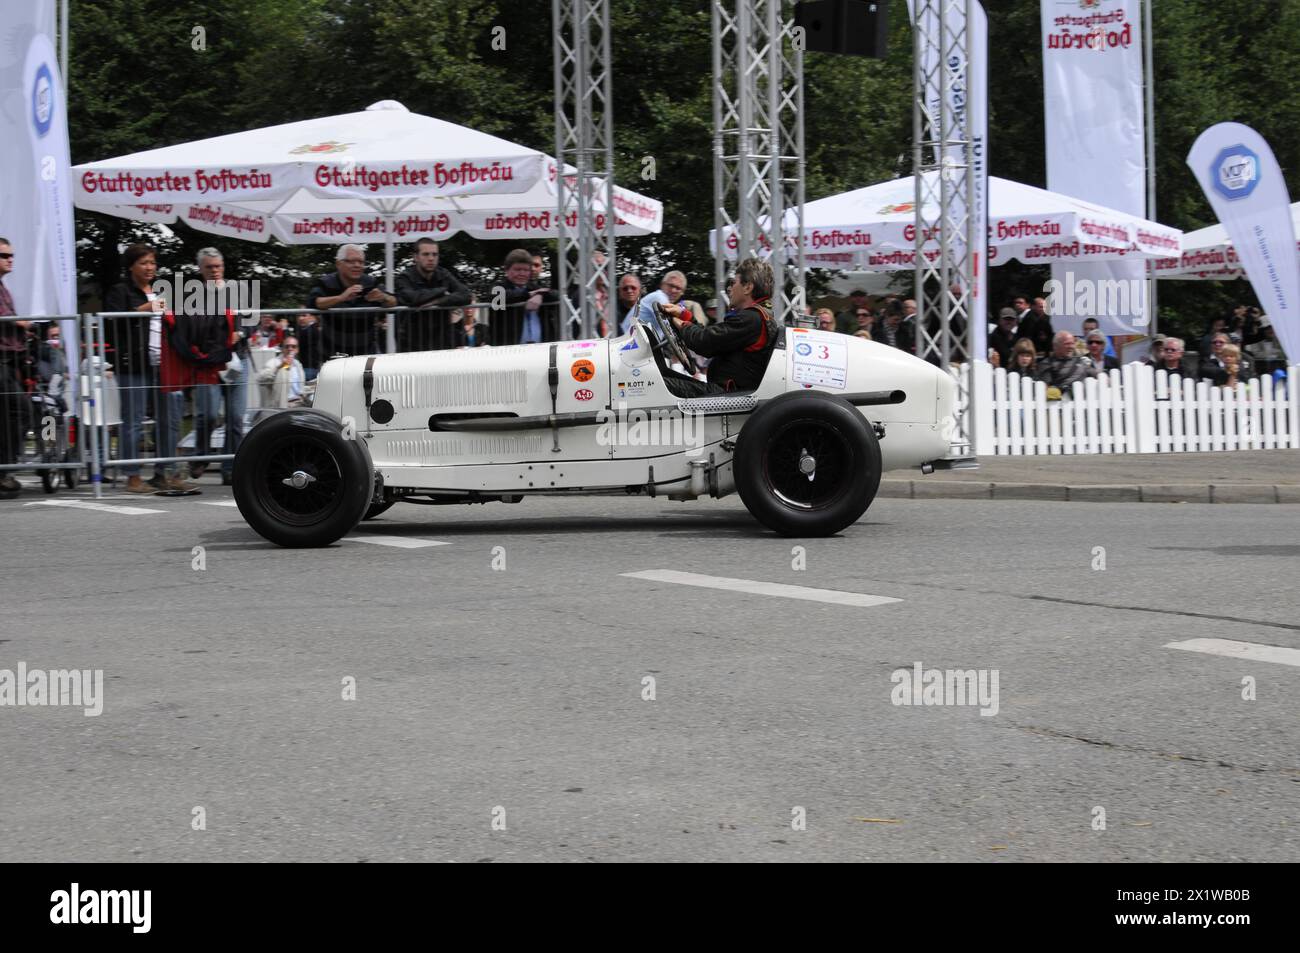 A vintage racing car drives past a crowd of people and advertising banners, SOLITUDE REVIVAL 2011, Stuttgart, Baden-Wuerttemberg, Germany Stock Photo